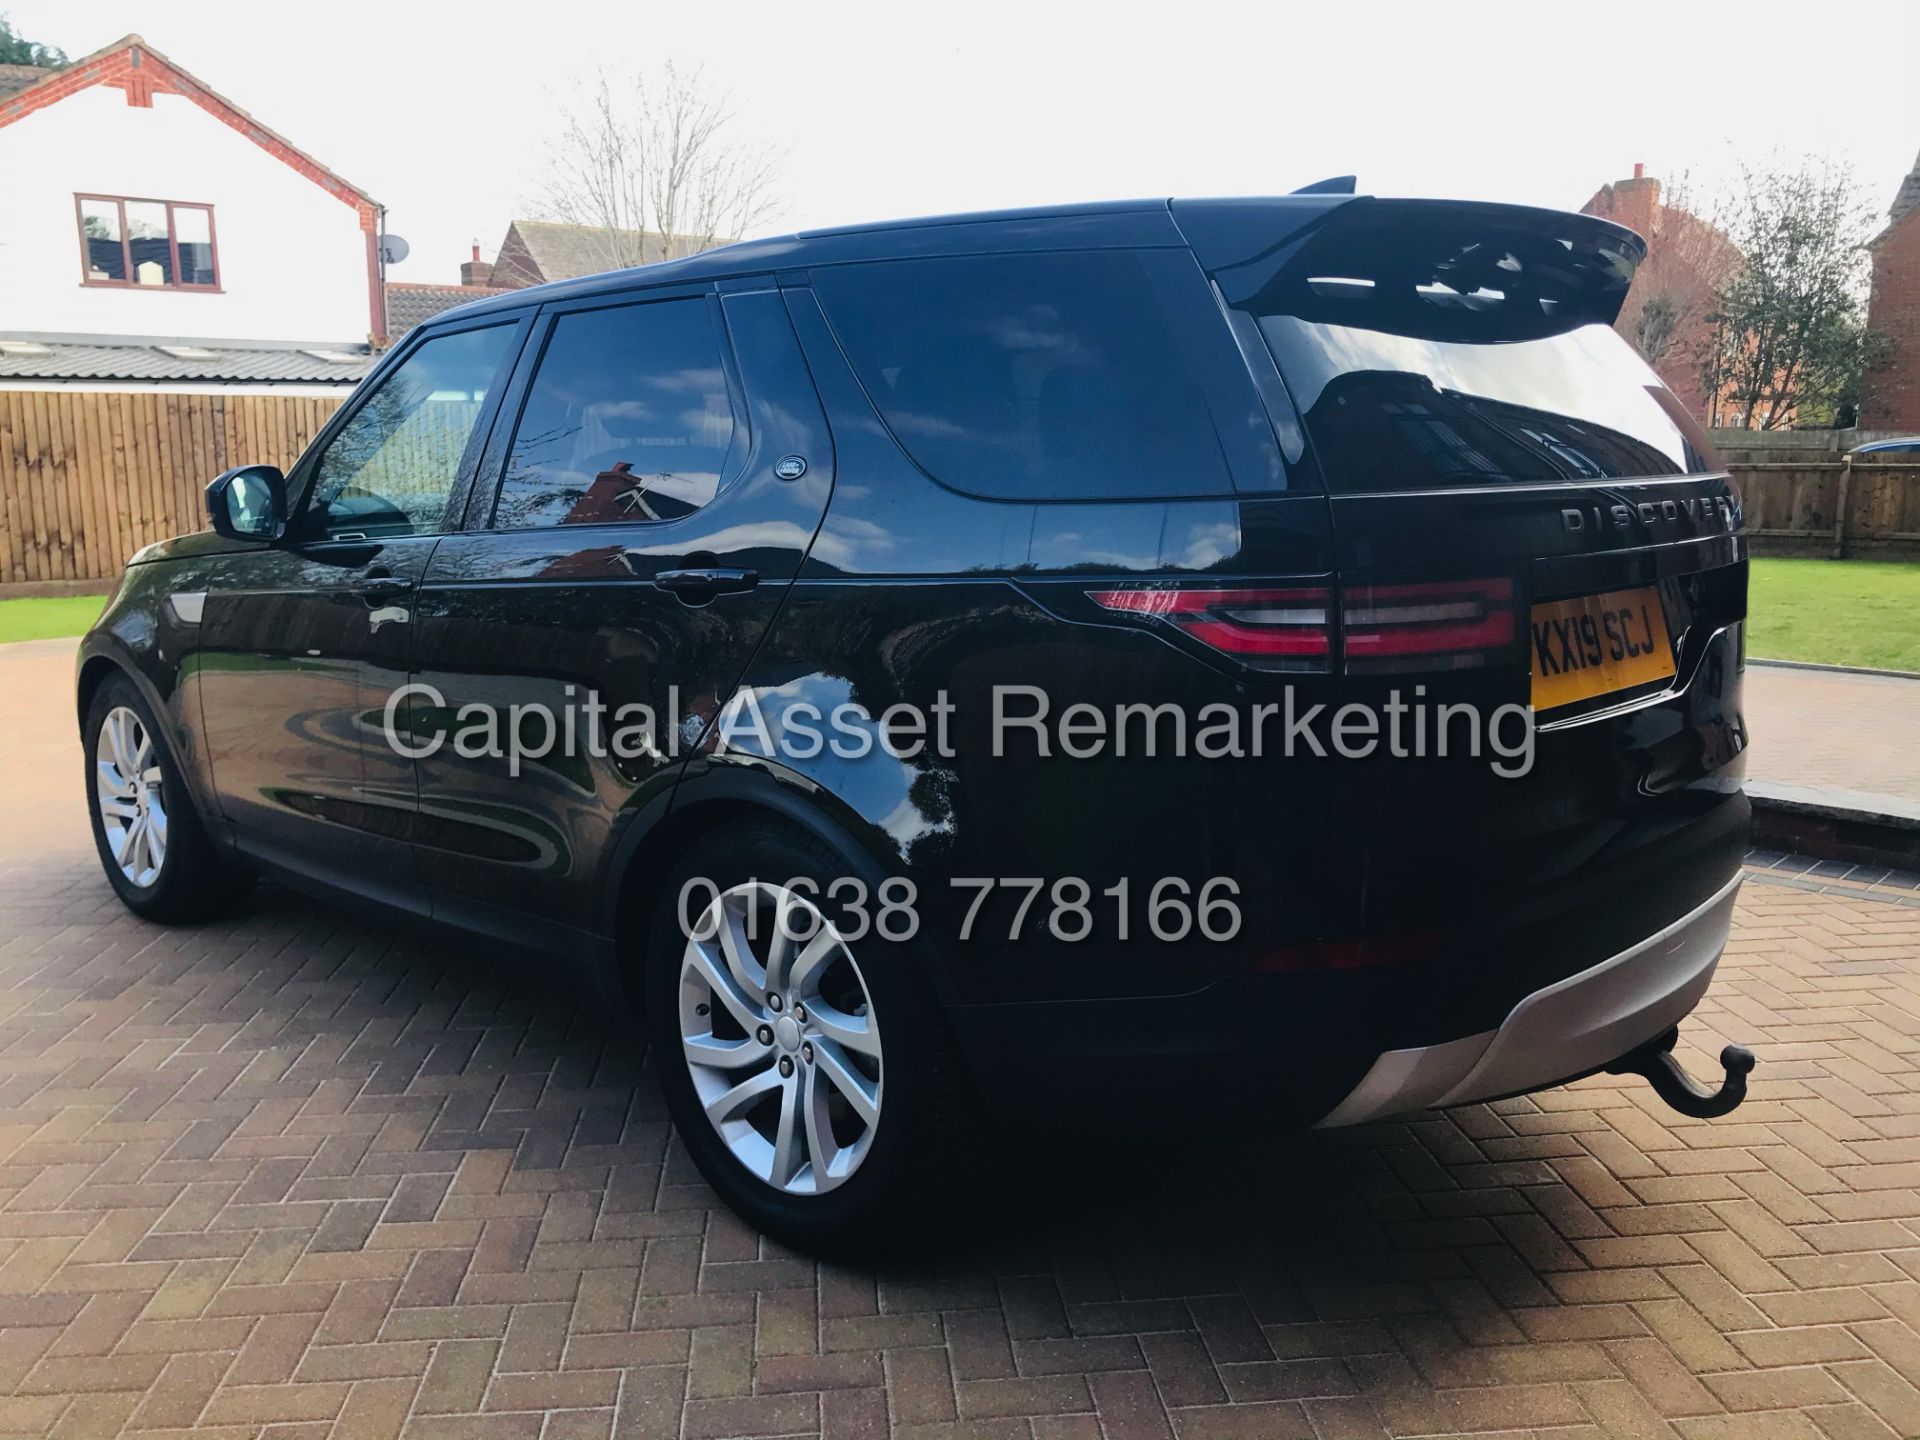 ON SALE LAND ROVER DISCOVERY 3.0 SDV6 "HSE EDITION"7 SEATER(19 REG) 1 OWNER-HUGE SPEC *PAN ROOF* 15K - Image 9 of 27